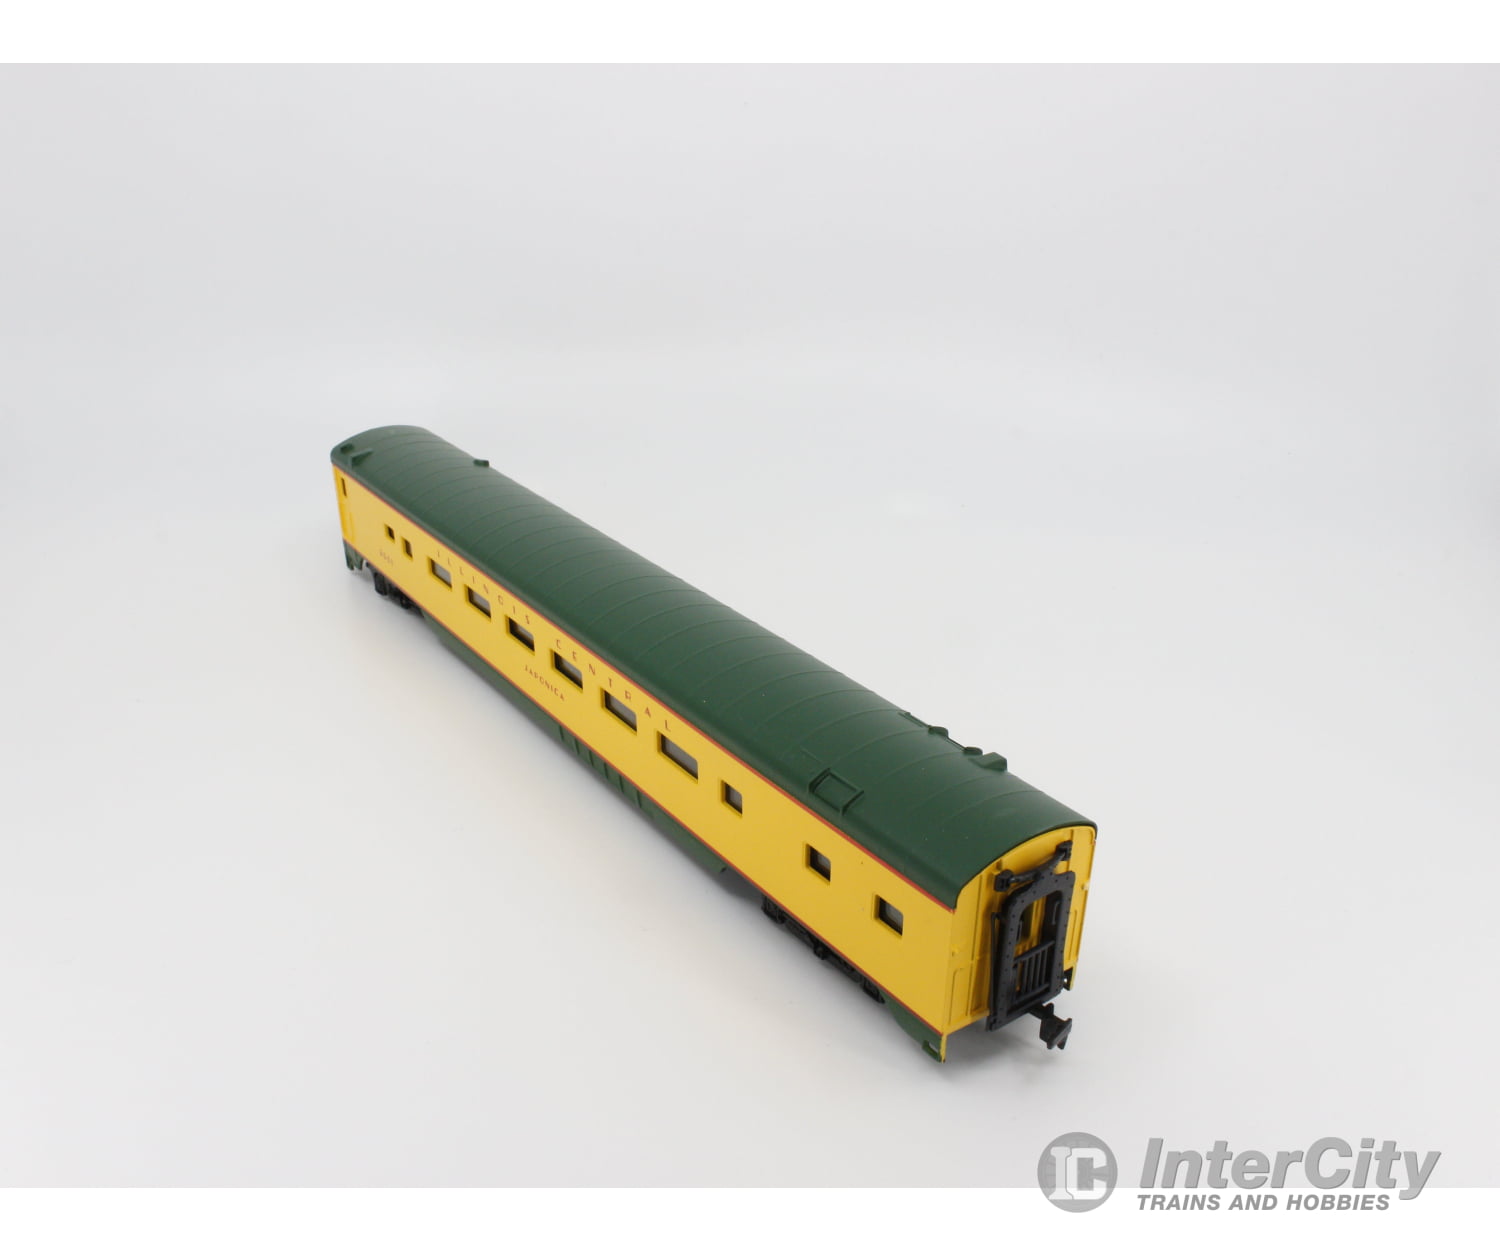 International Hobby Corp. 48331 Ho Coach Passenger Car Smooth Side P.s. Illinois Central (Ic) 2601